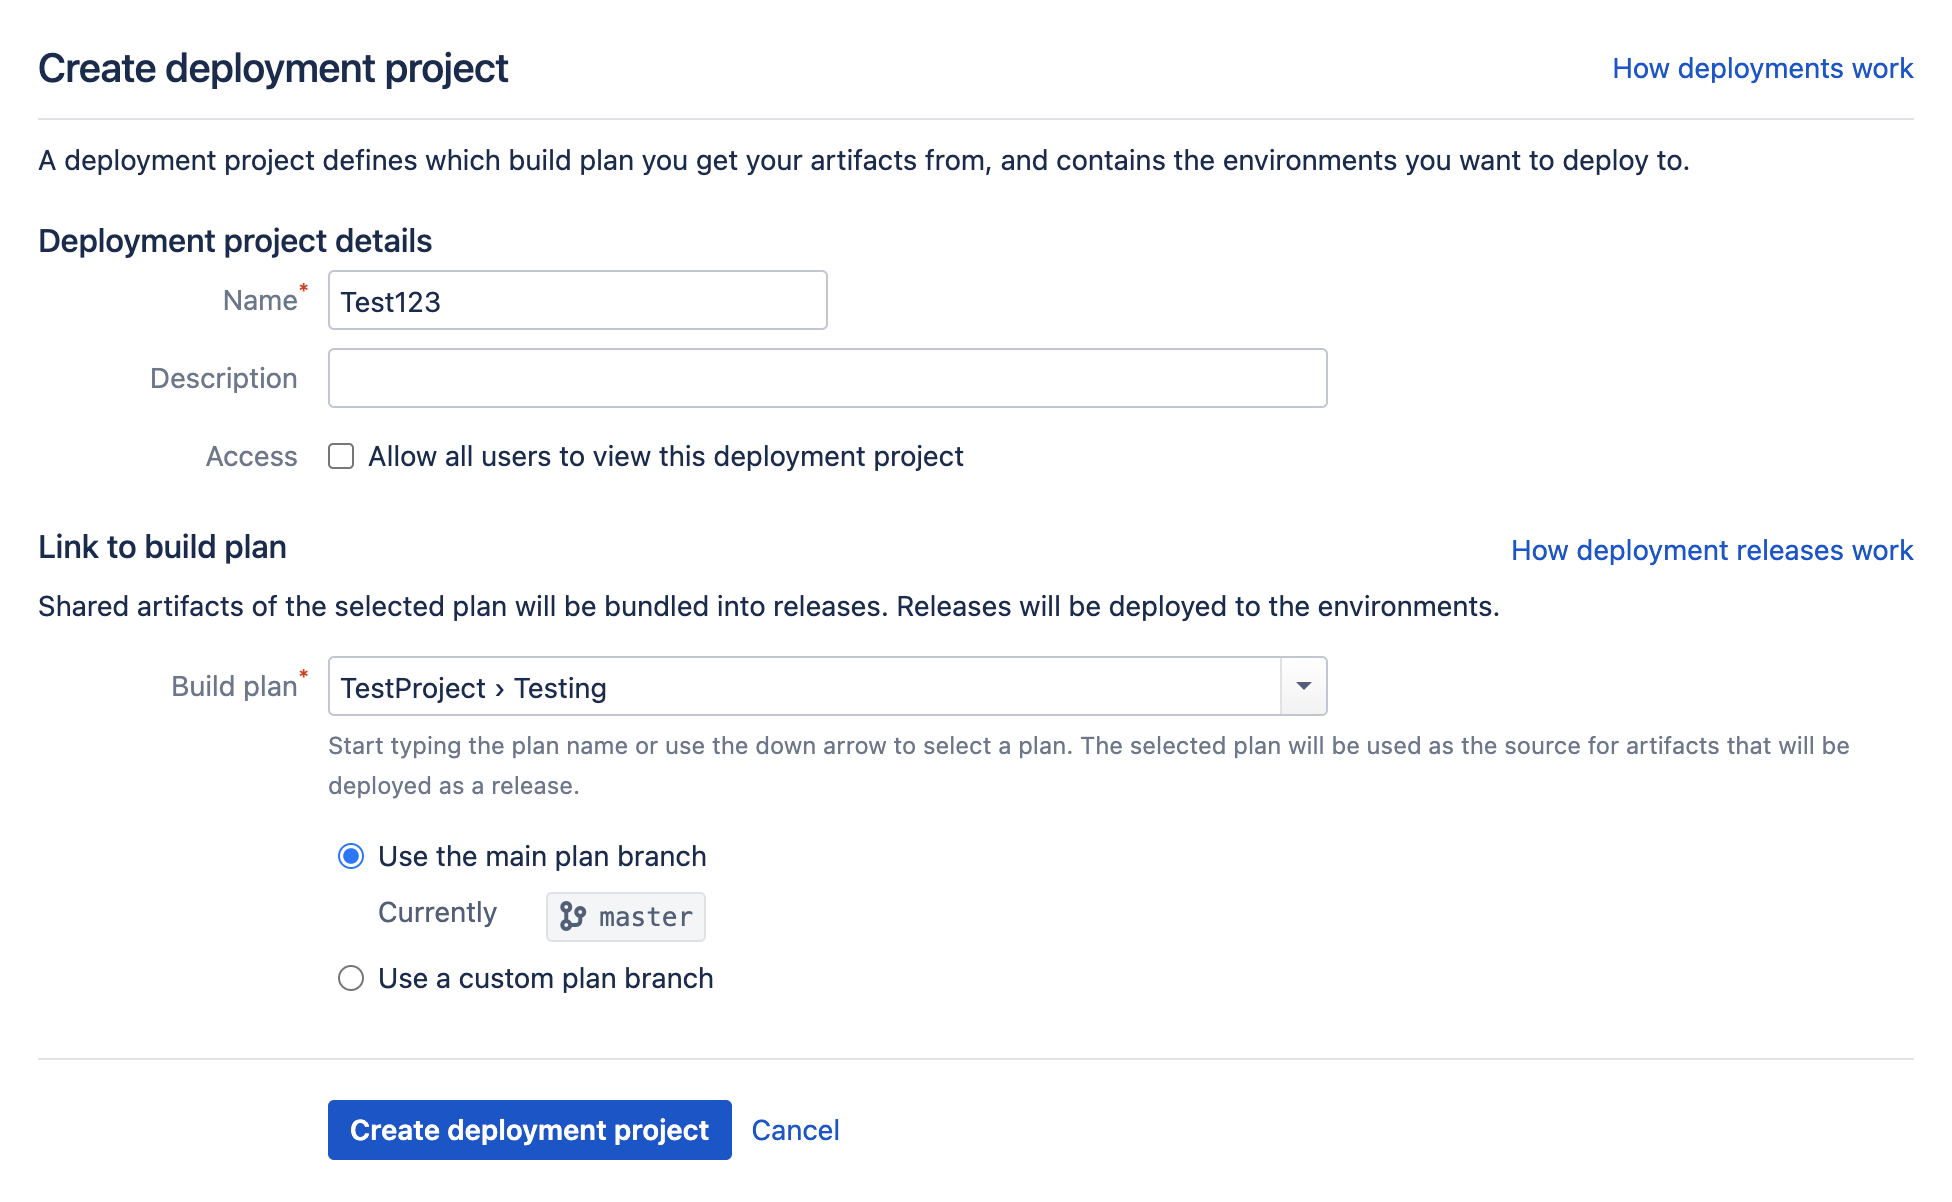 Create deployment project screen